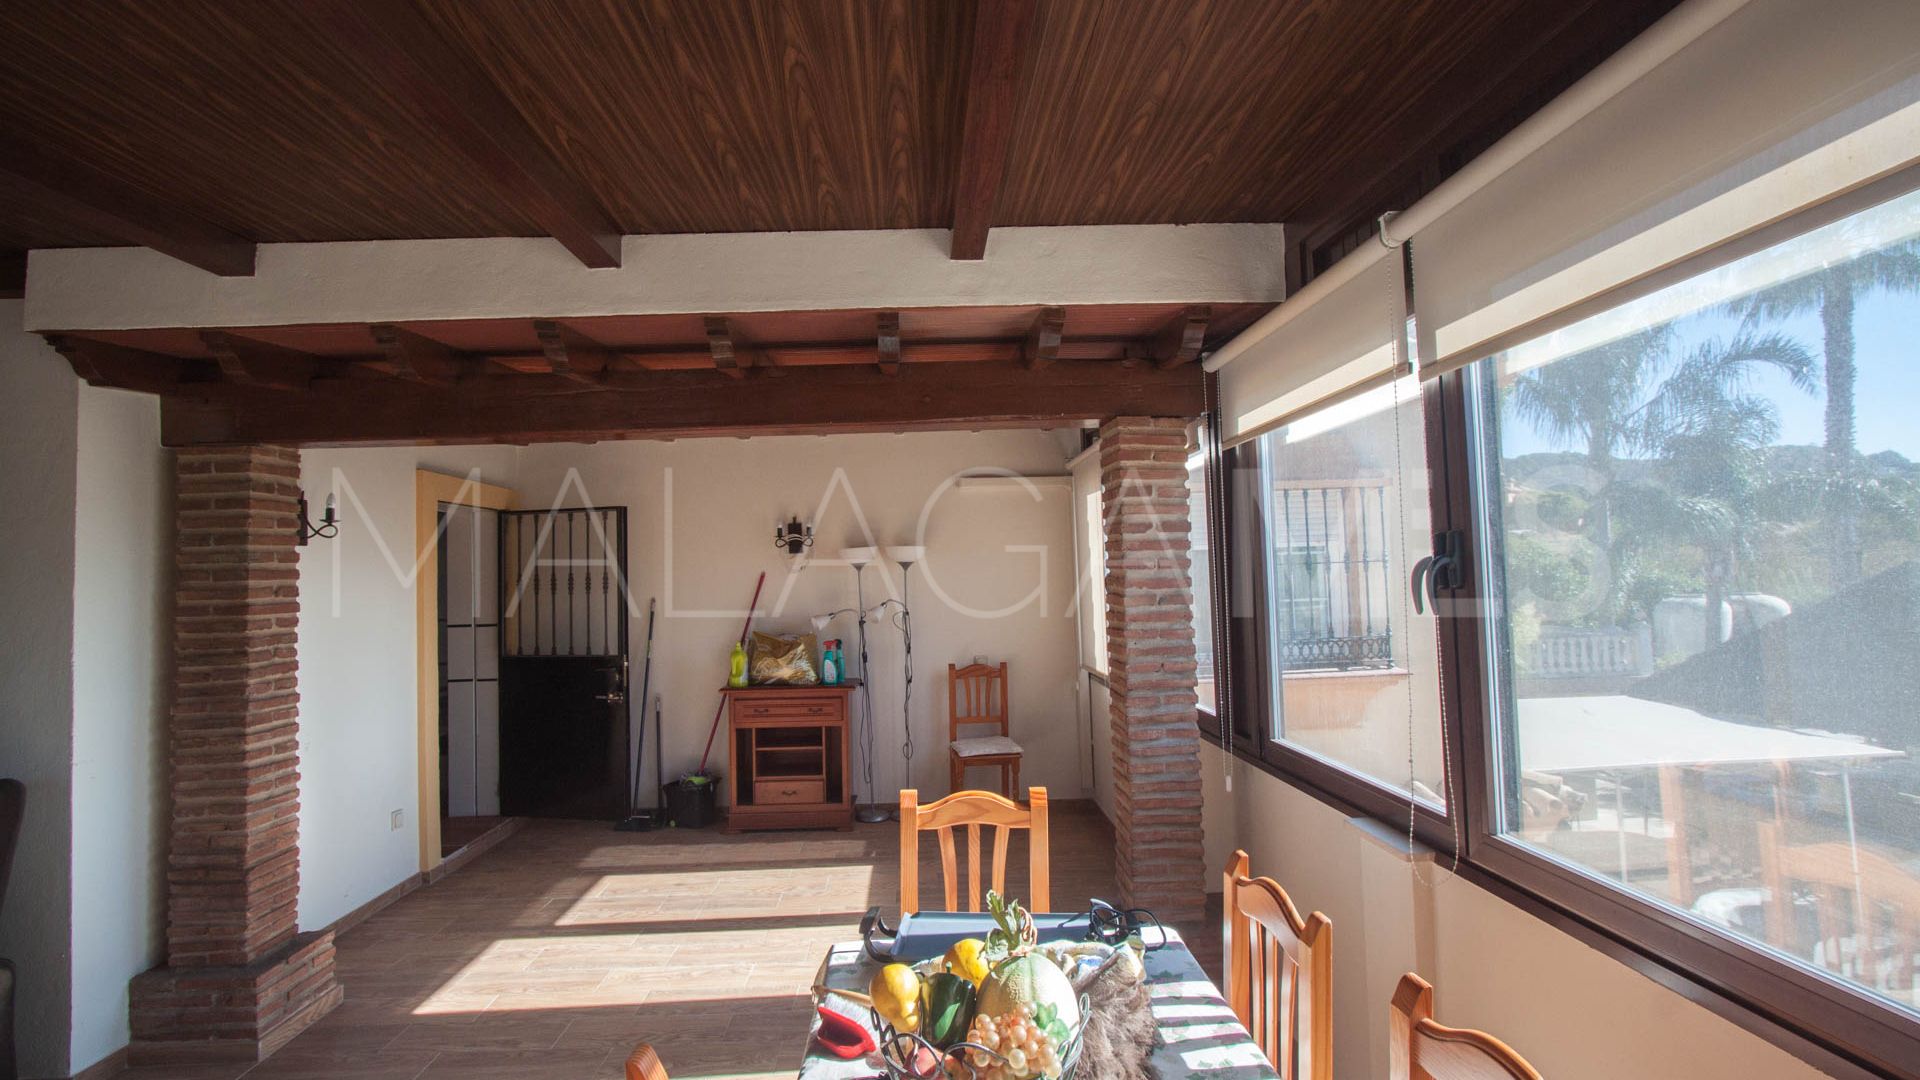 Estepona, finca with 3 bedrooms for sale